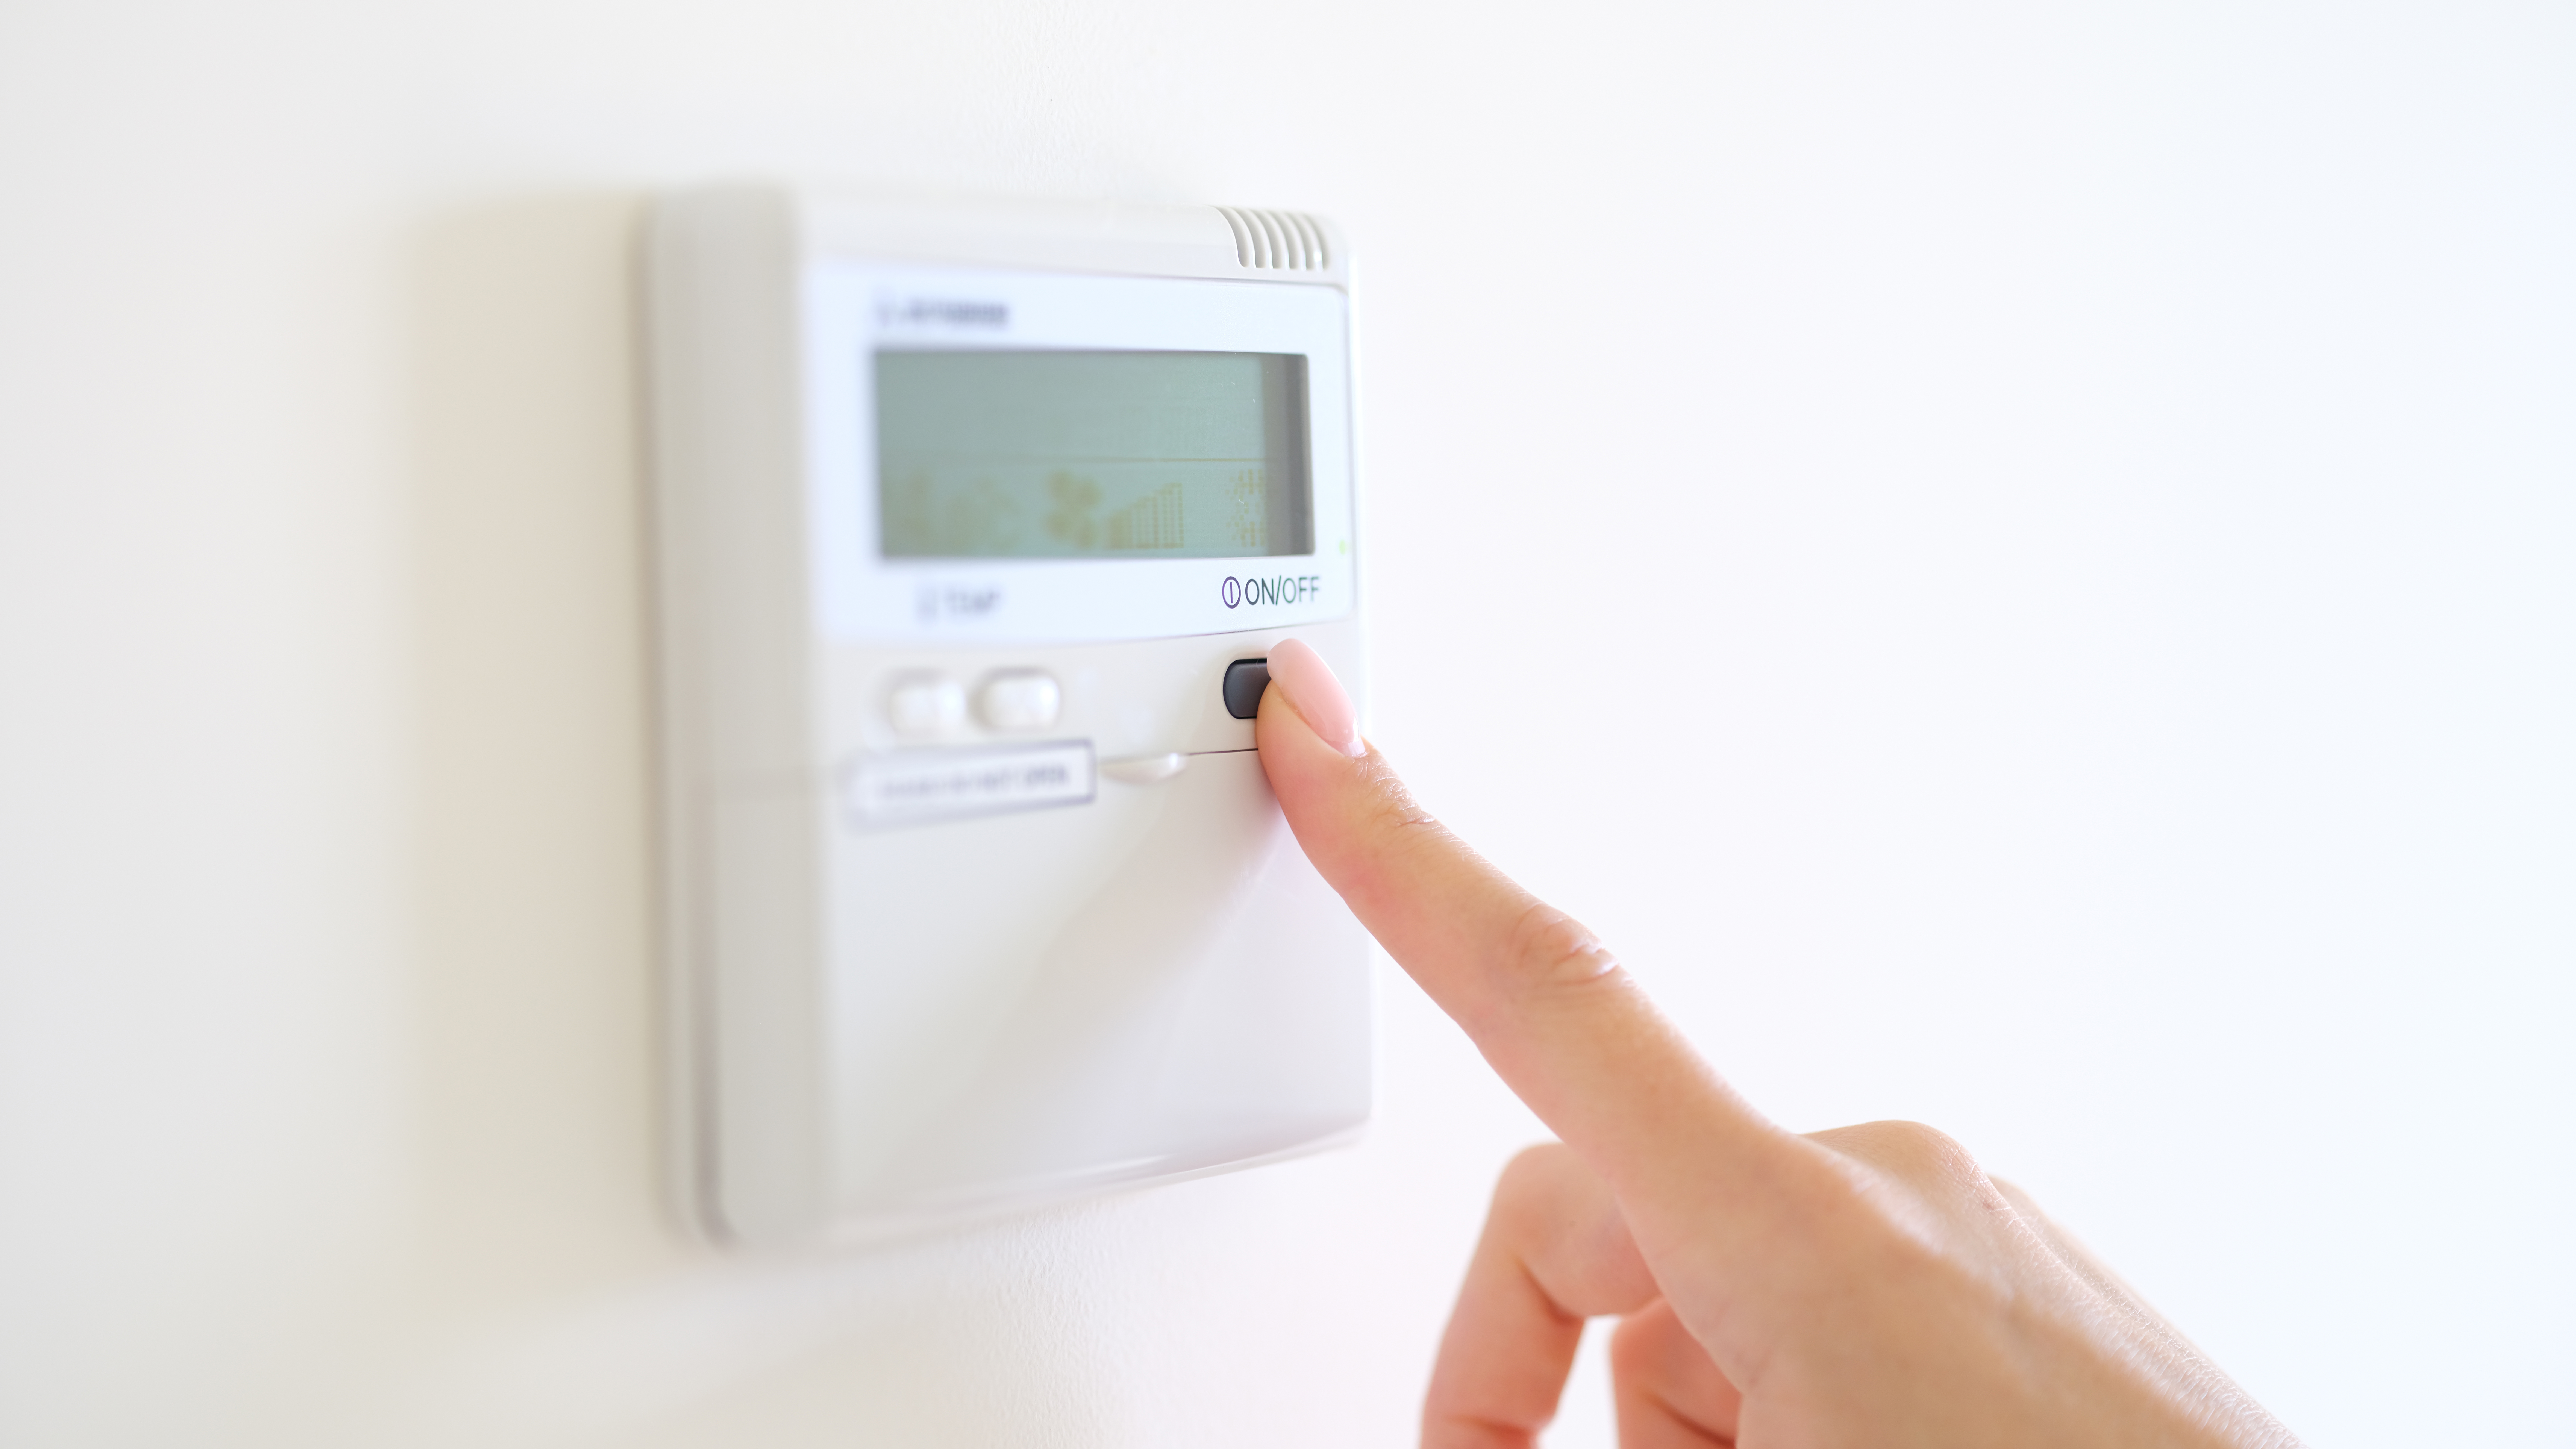 4 Ways to Set a Thermostat - wikiHow